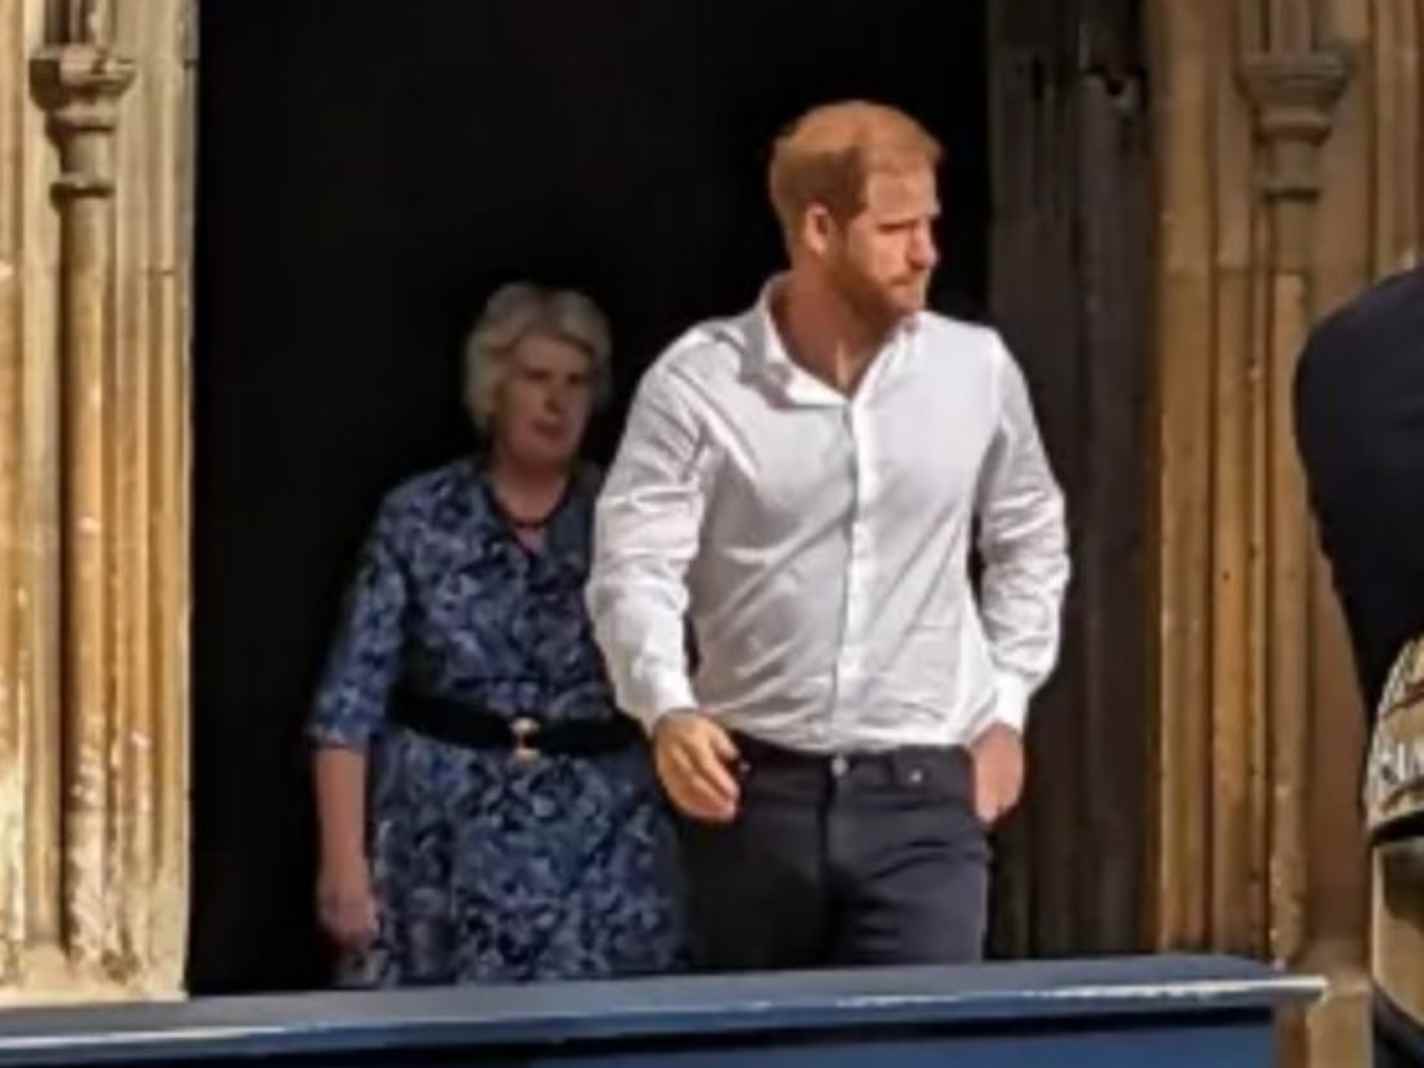 Prince Harry’s No Suit, No Tie Look at the Queen’s Tribute Raises Eyebrows